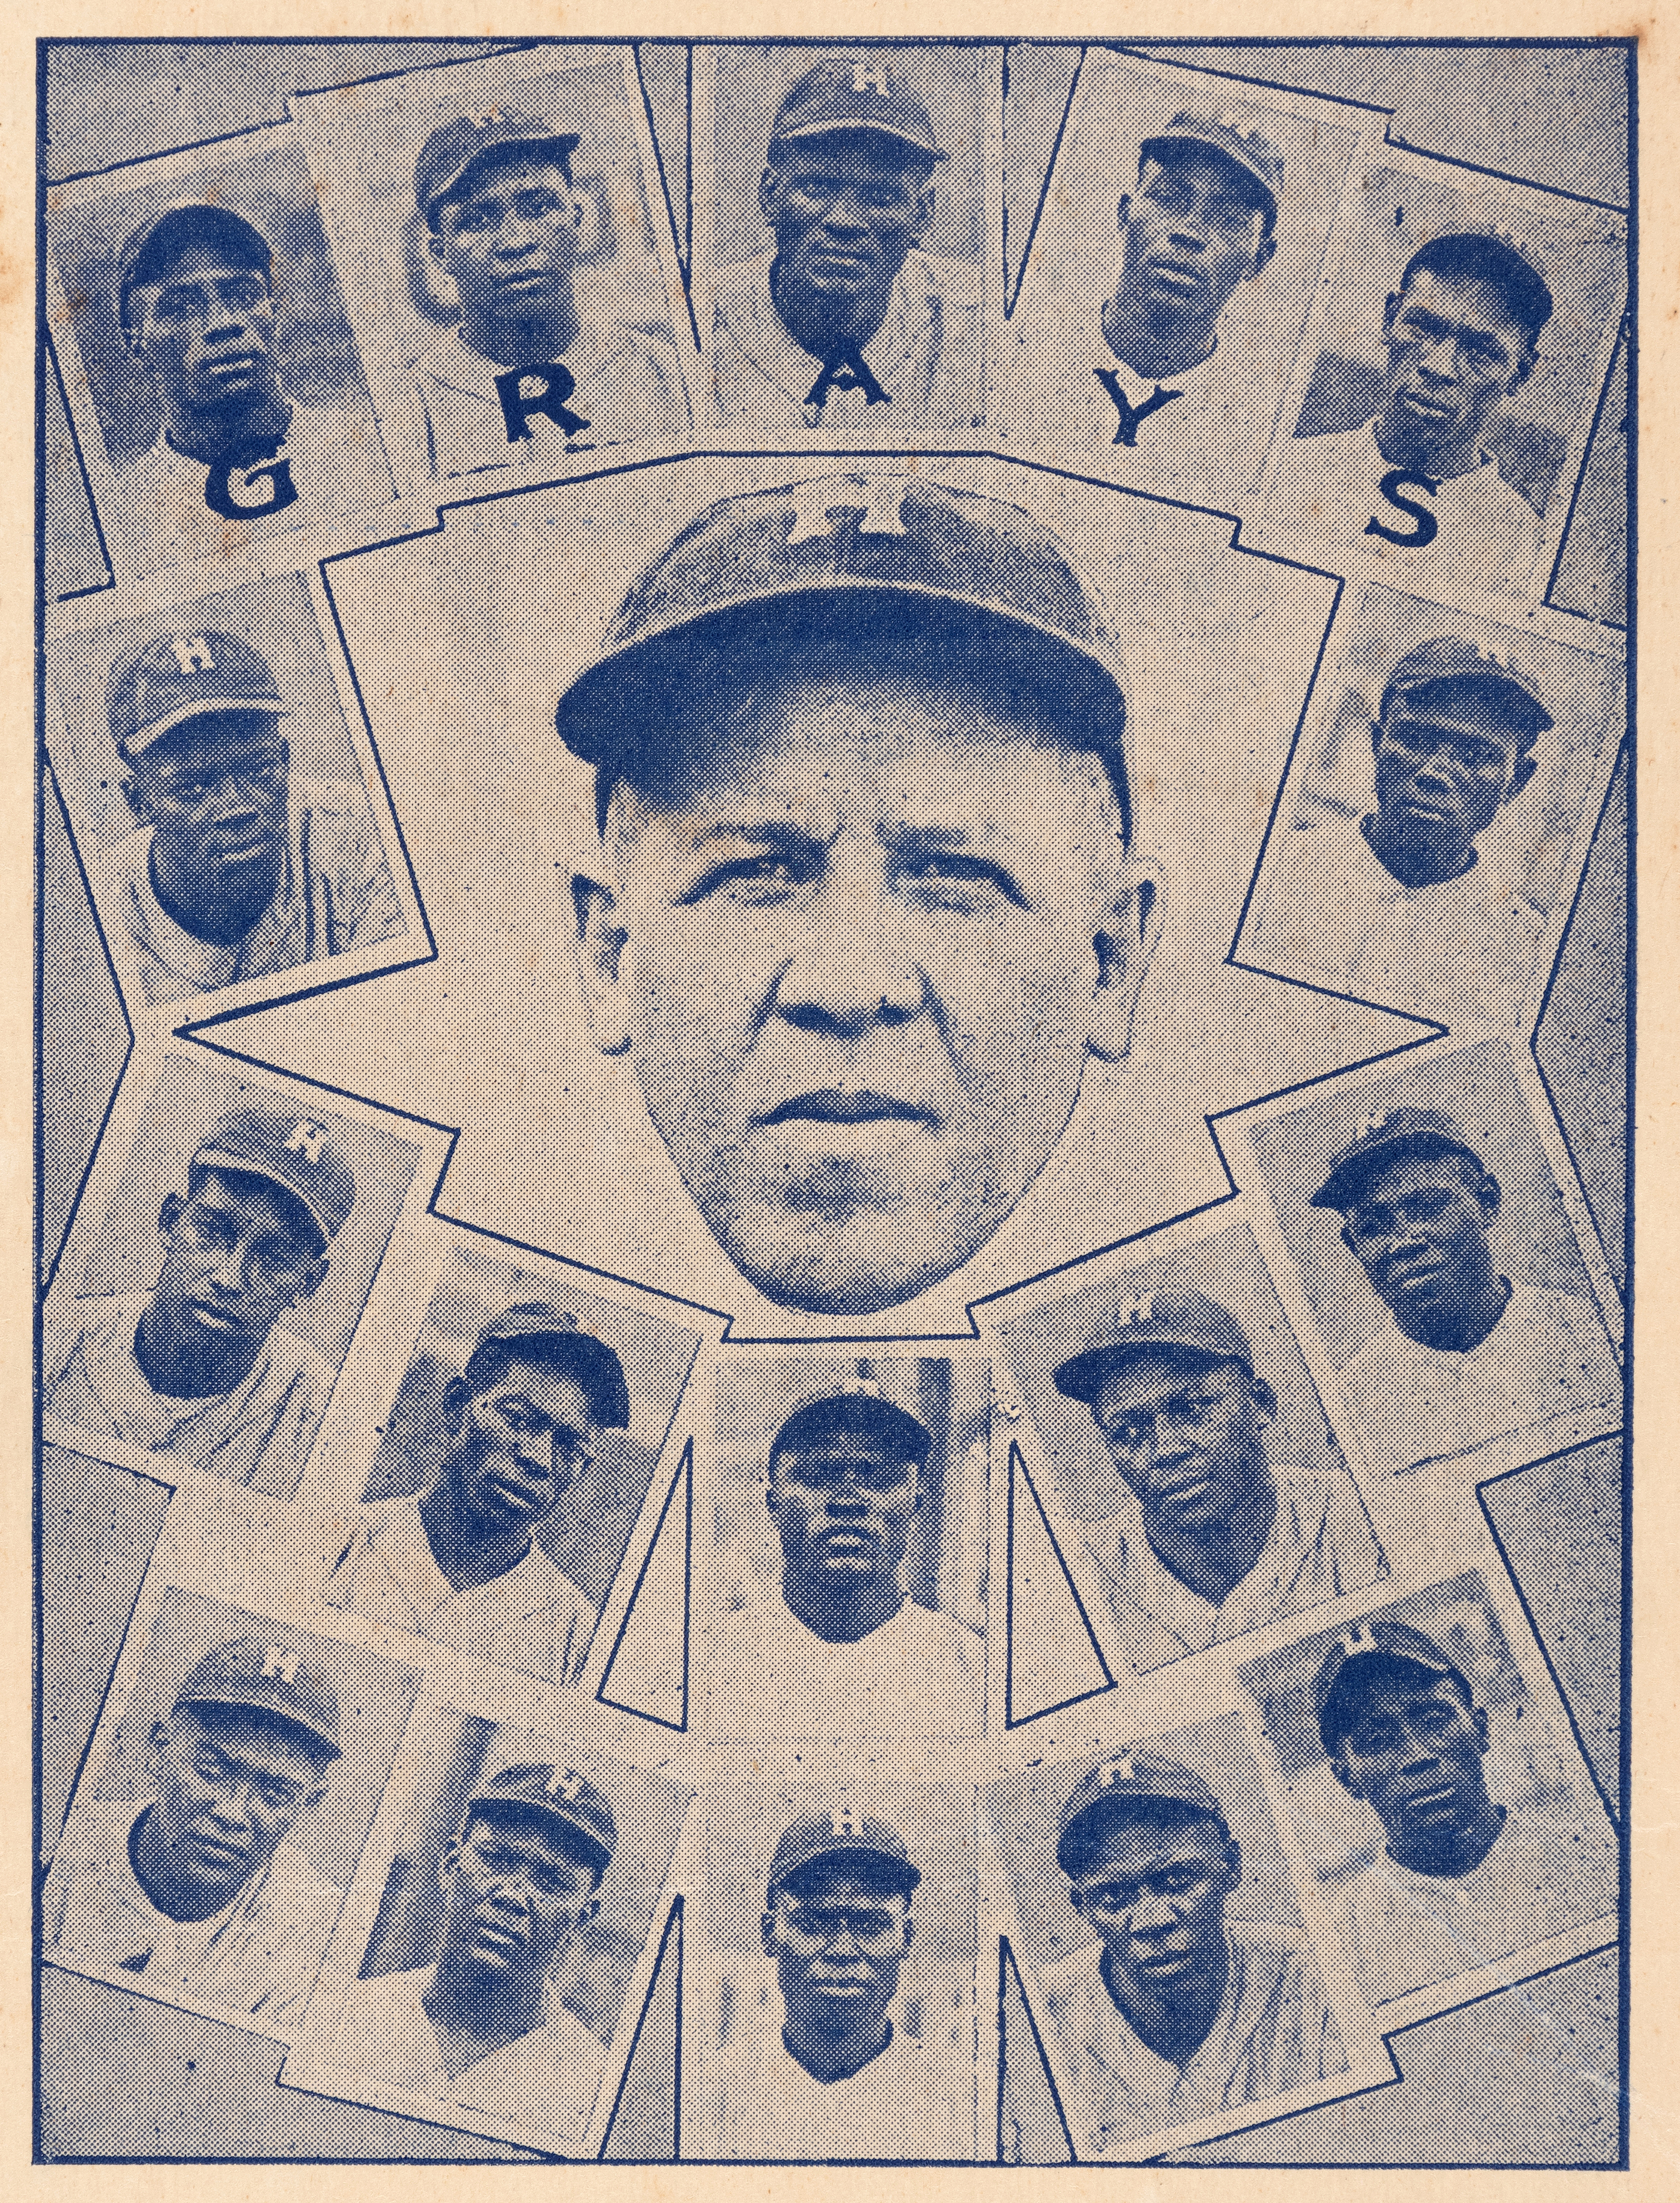 This page from the 1935 Negro League Baseball broadside shows the Homestead Grays. 